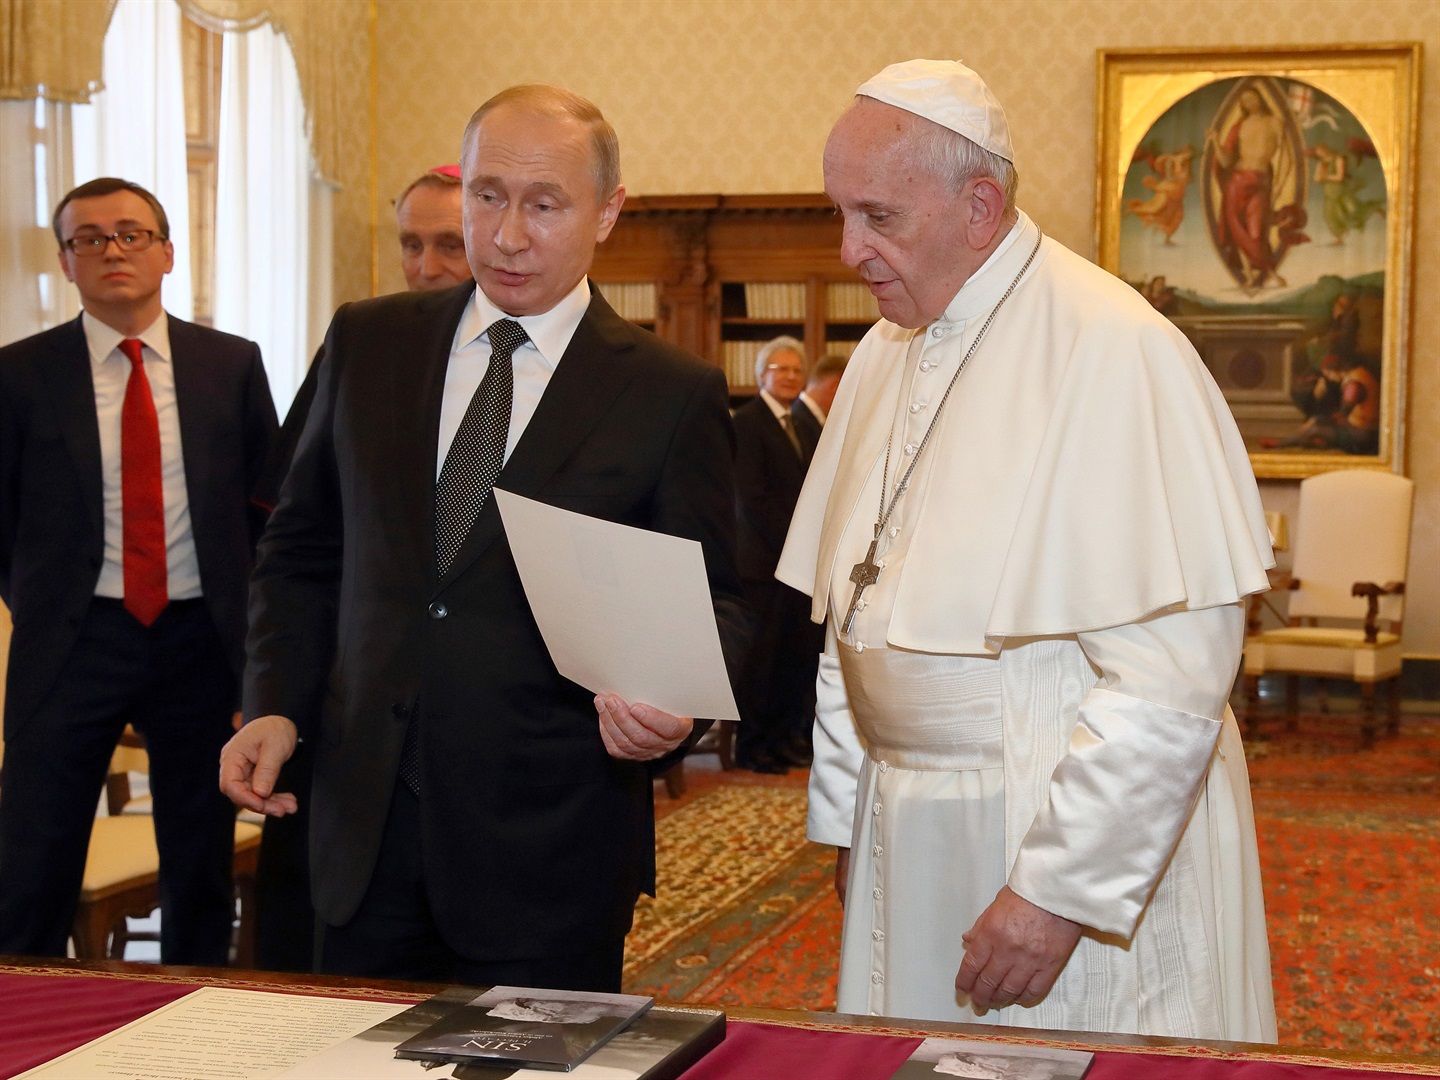 Pope Francis exchanges gifts with Russia's President Vladimir Putin during an audience at the Apostolic Palace on July 04, 2019 in Vatican City, Vatican. Photo by Vatican Pool/Getty Images